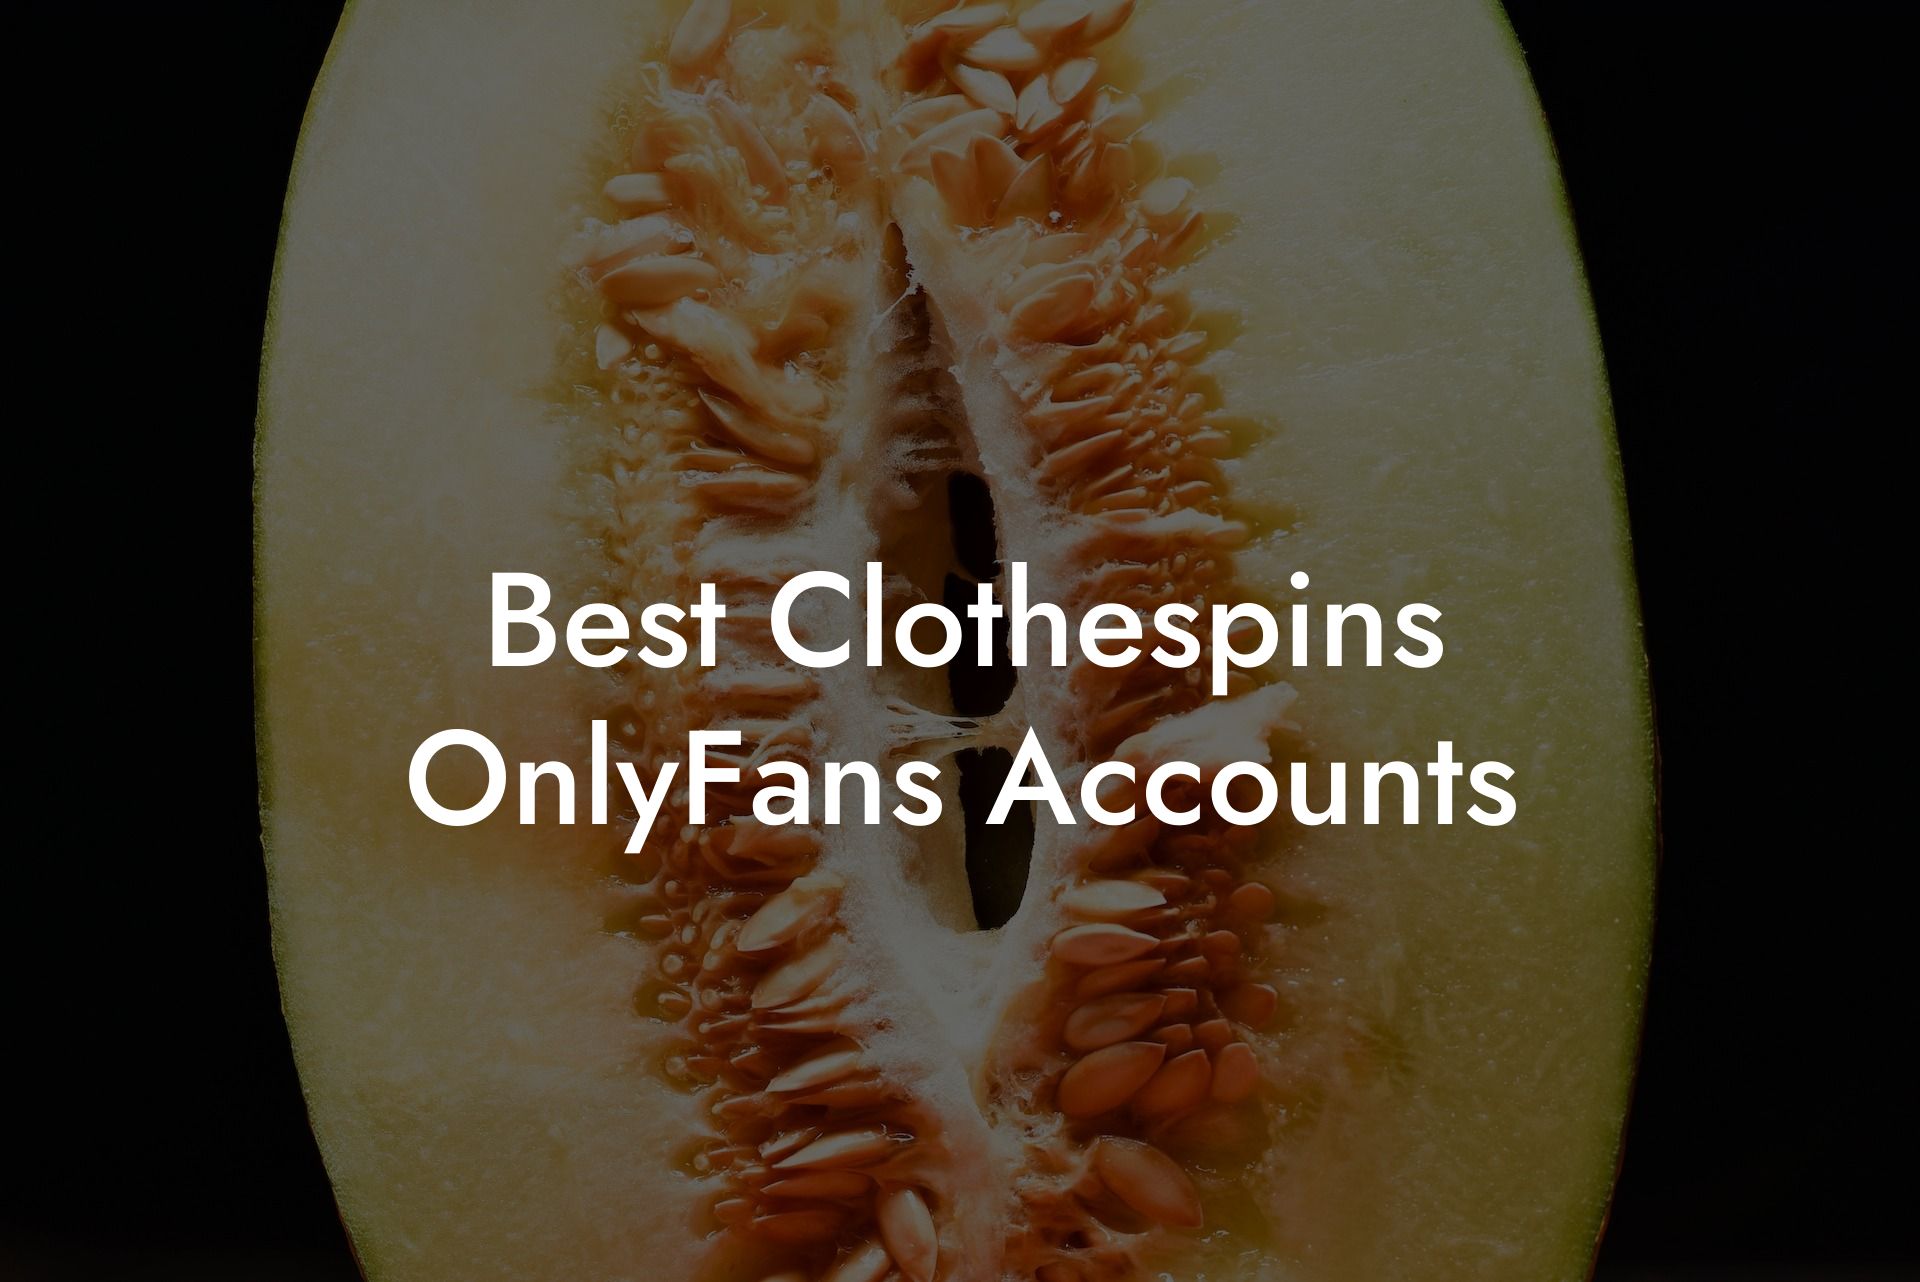 Best Clothespins OnlyFans Accounts